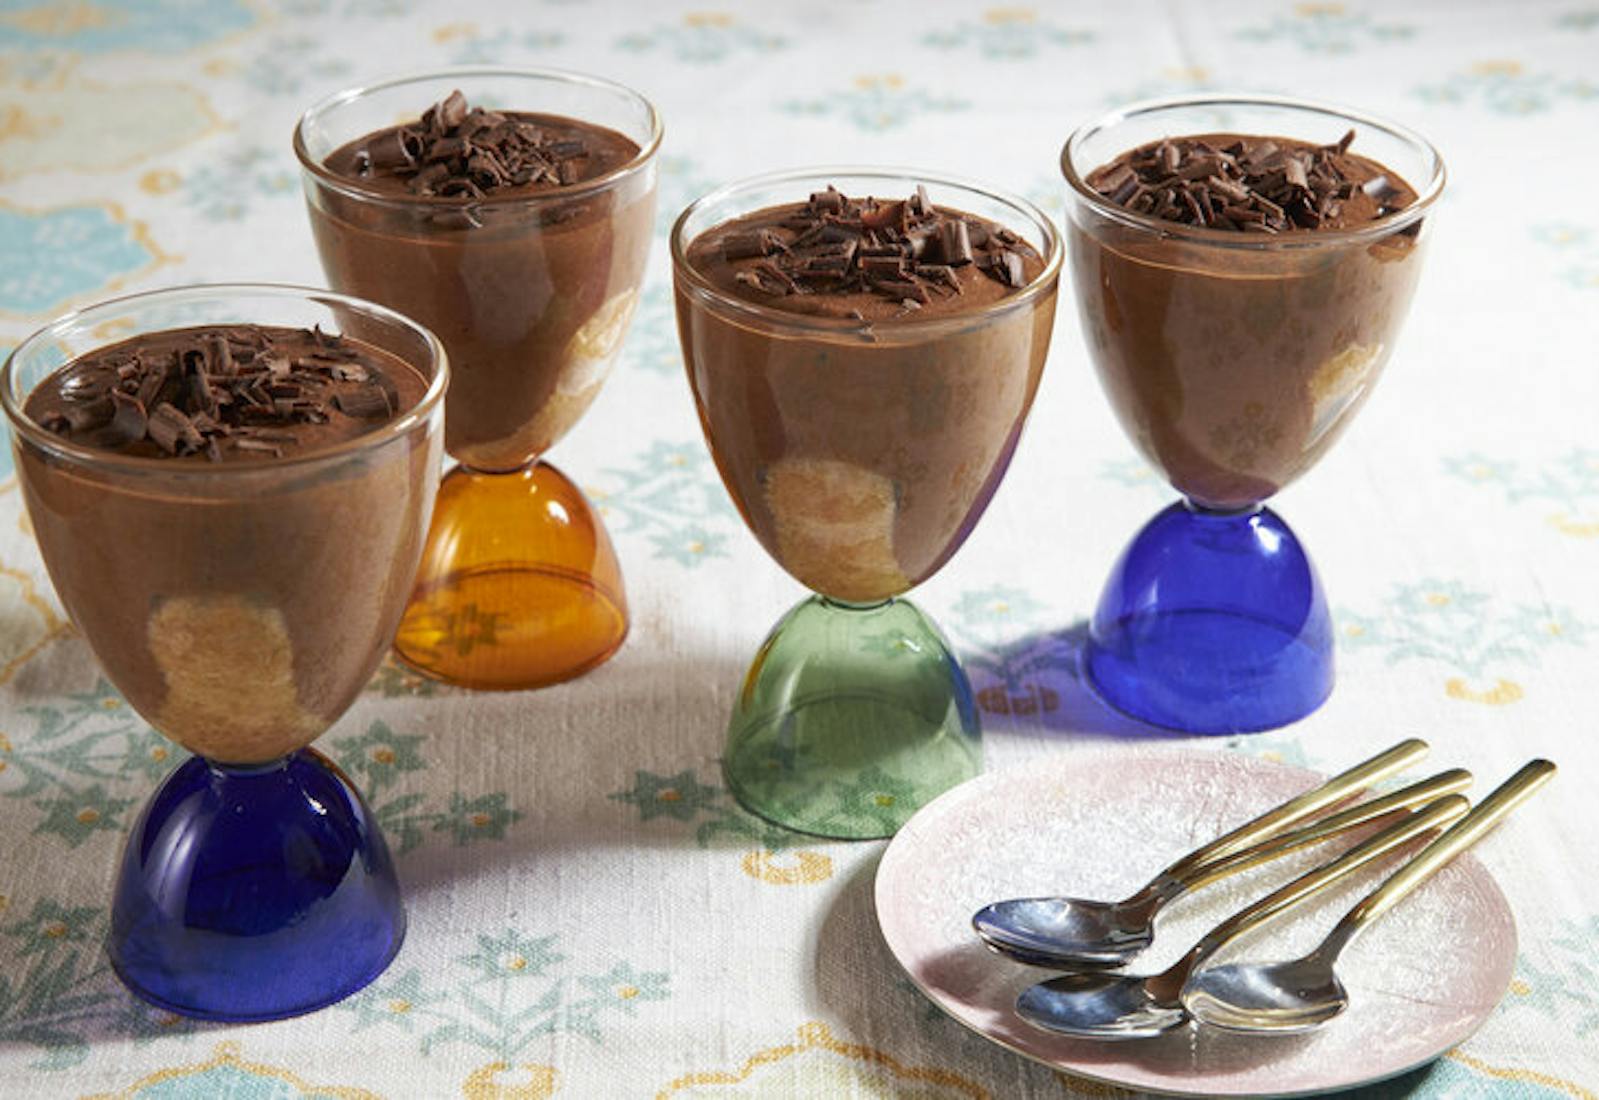 Chocolate mousse in ice cream glasses with spoons, atop pale patterned tablecloth.